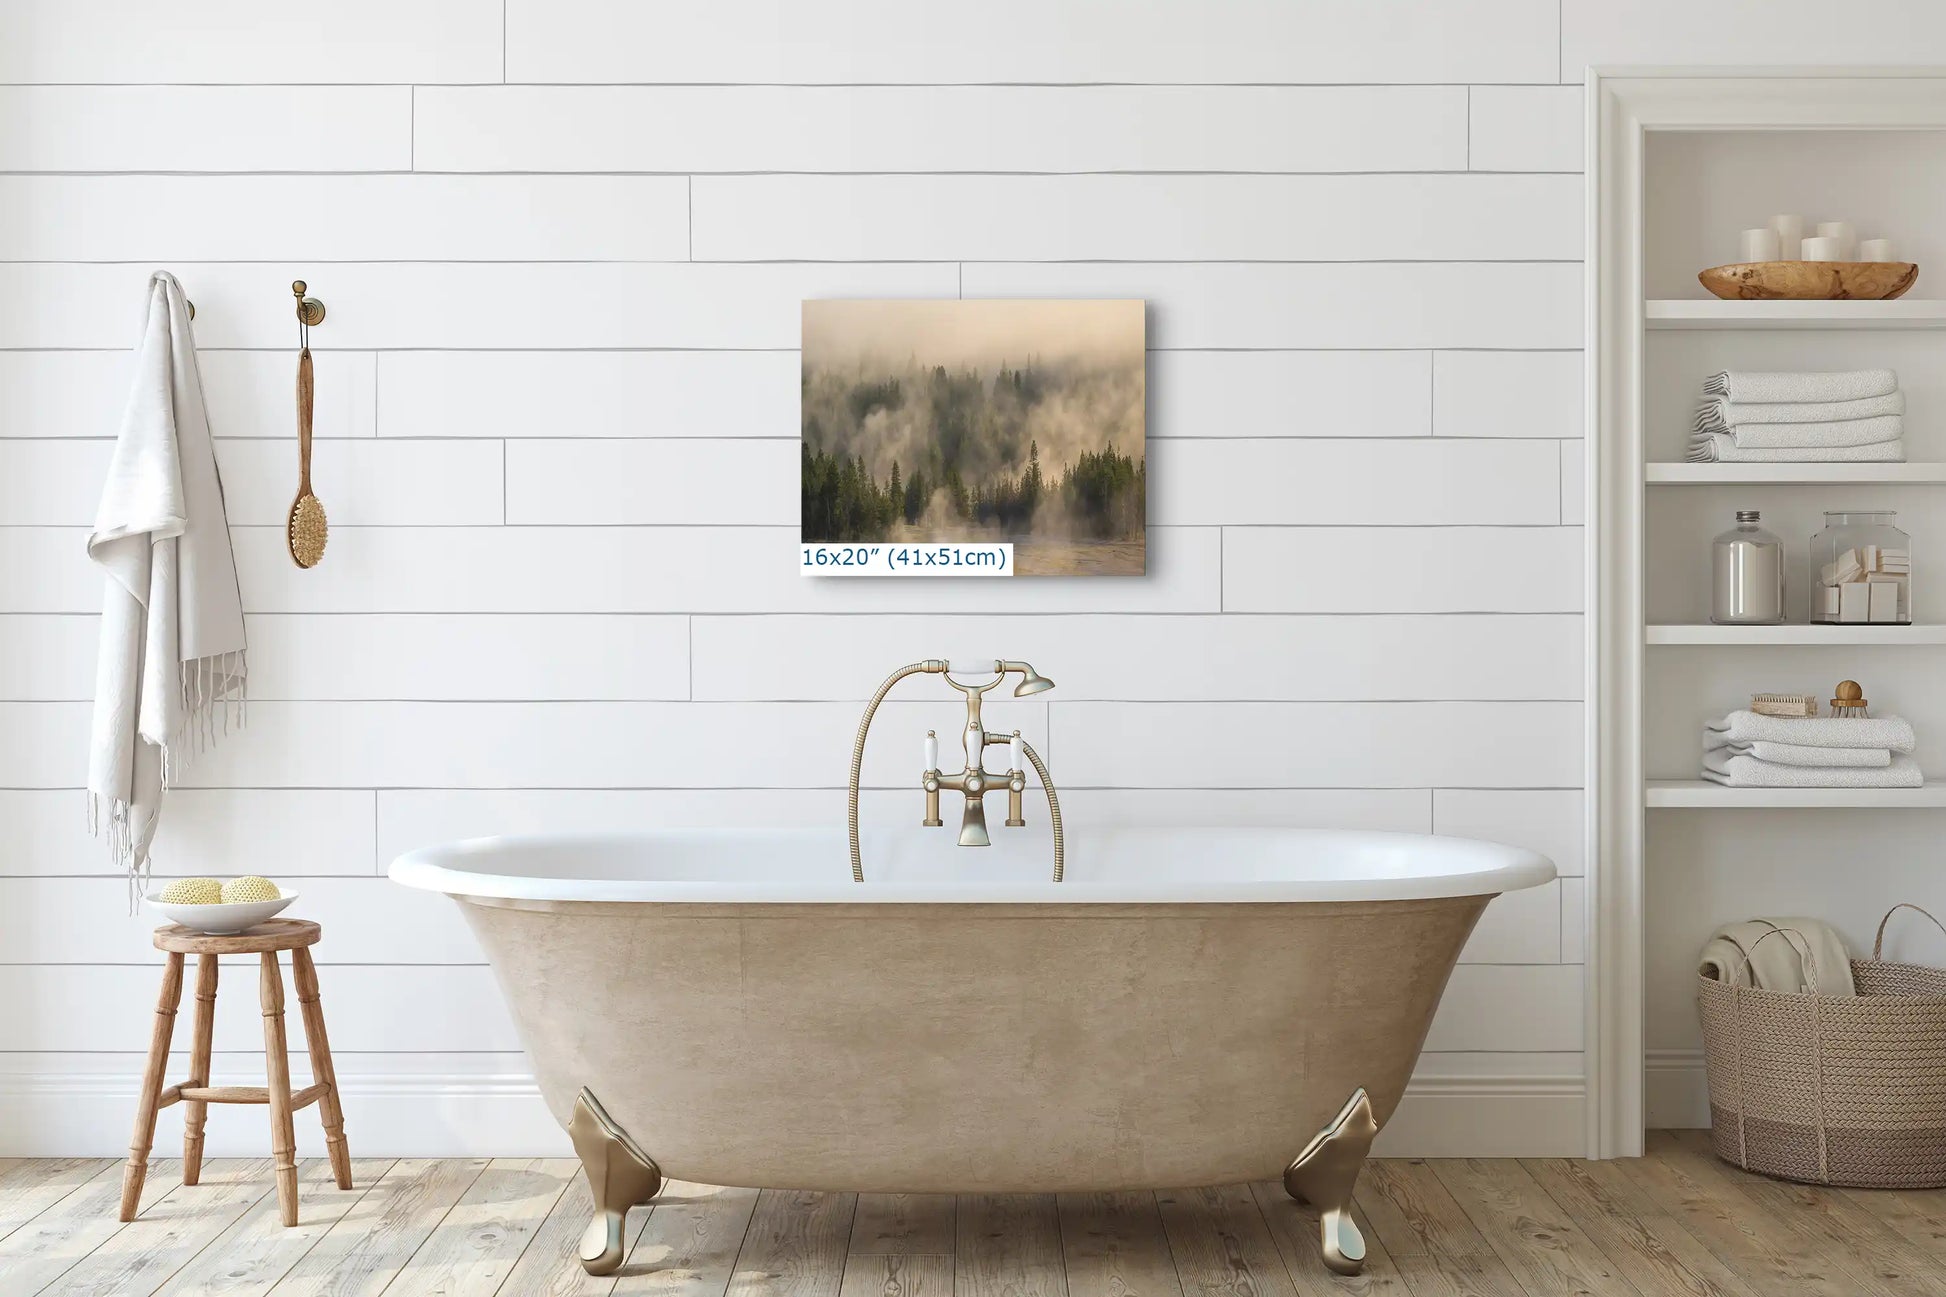 A 16x20 photo print of Yellowstone's foggy forest above a bathtub, blending nature's tranquility with home relaxation.